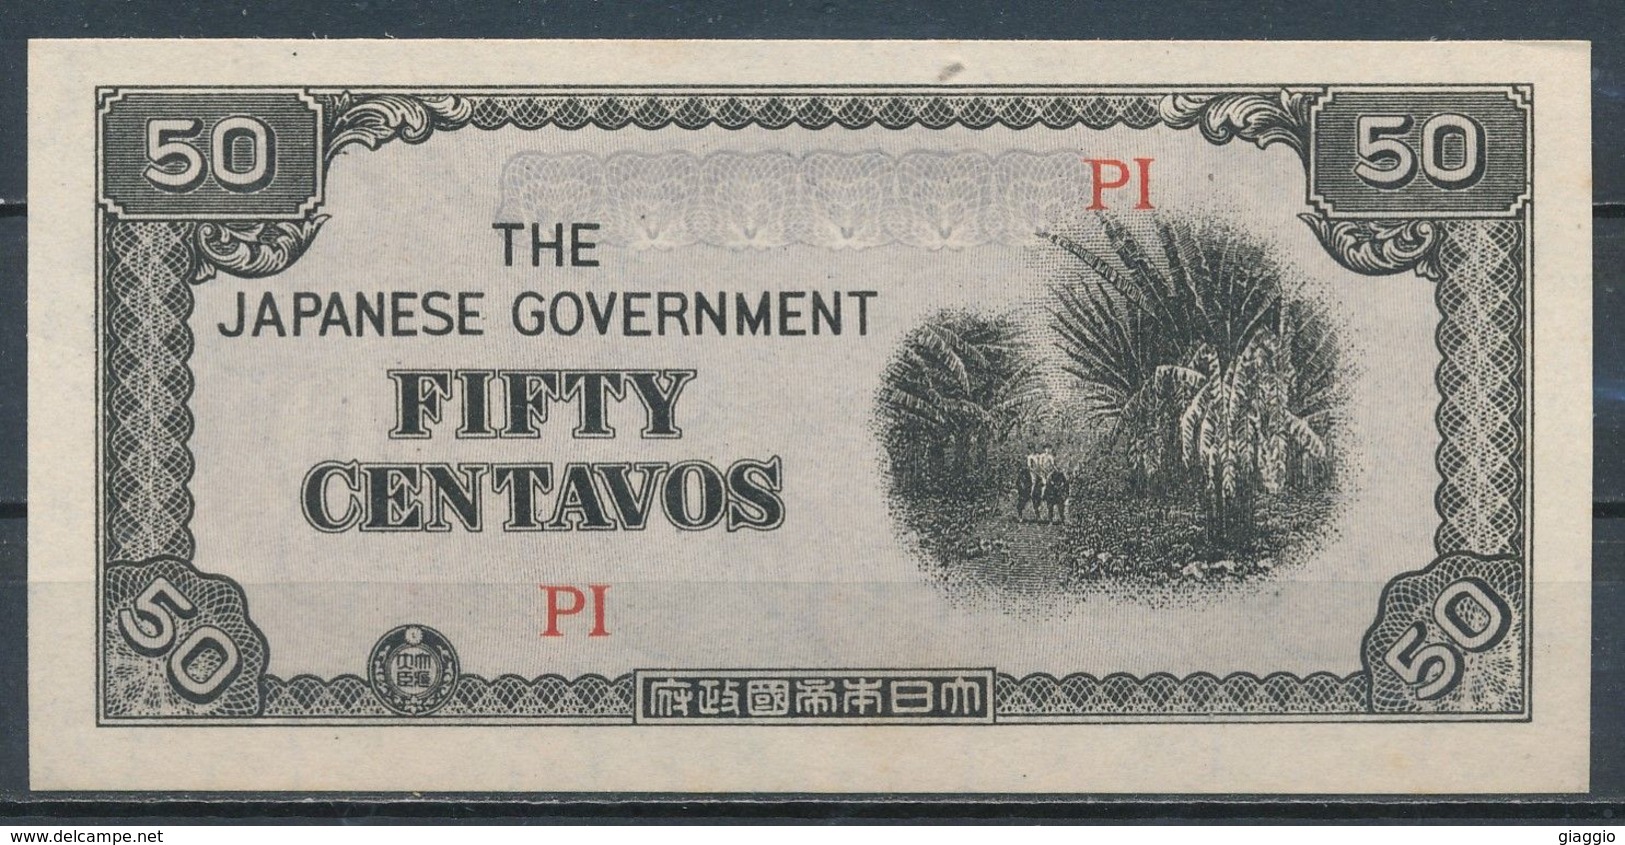 °°° JAPAN - JAPANESE GOVERNMENT 50 FIFTY CENTAVOS °°° - Japan